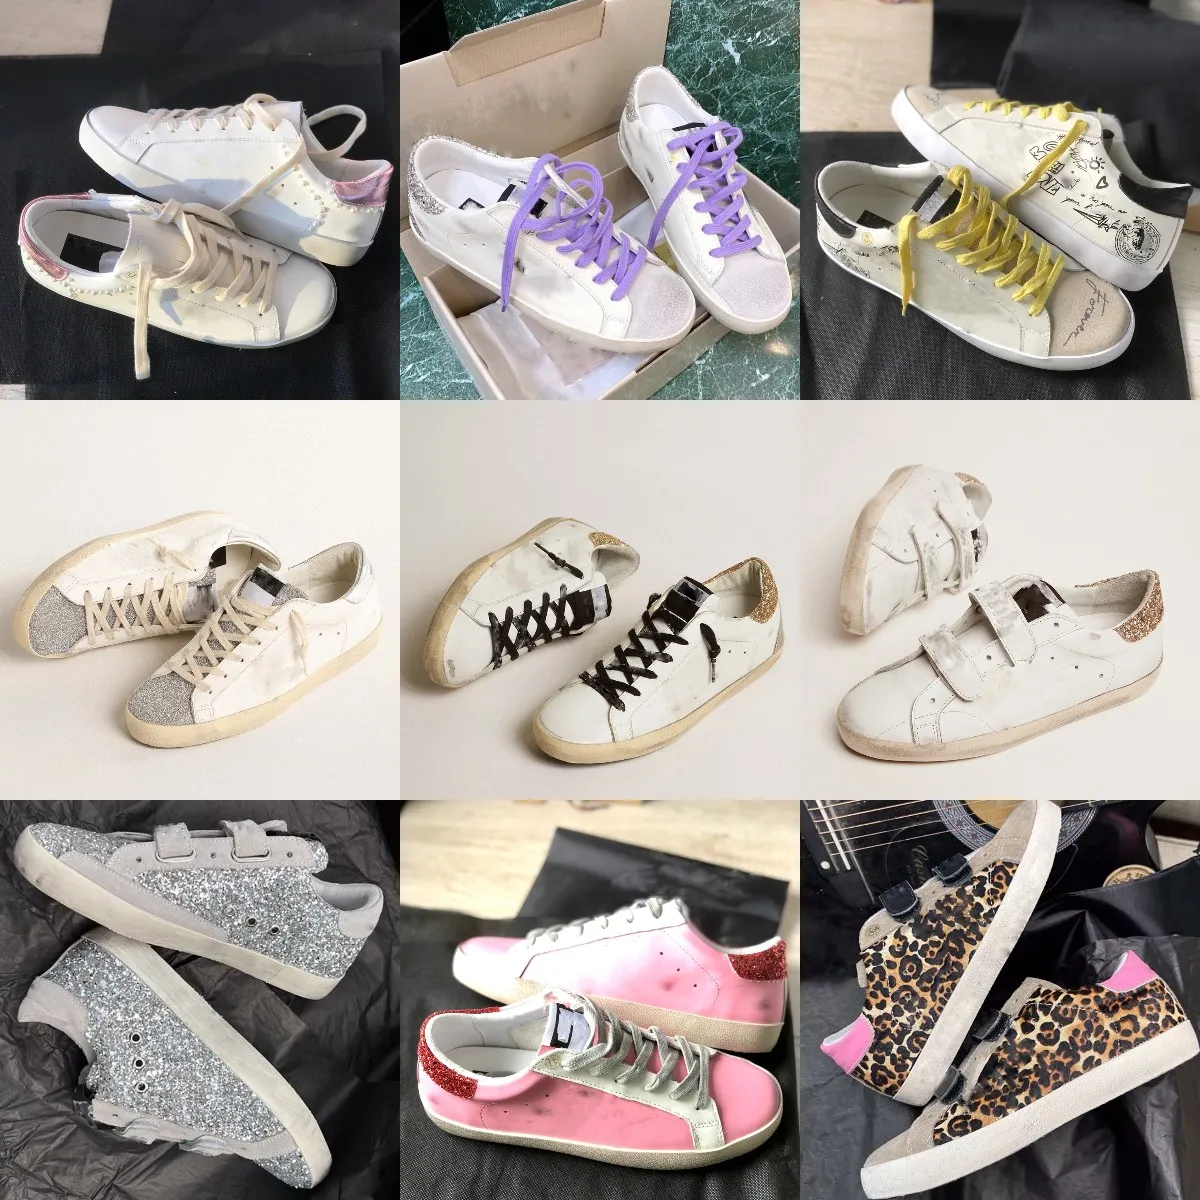 Designer Star Women Sneakers Luxury Fashion Casual Shoes Italie Brand classique blanc do-Old Sequin Dirty Best Quality Shoe